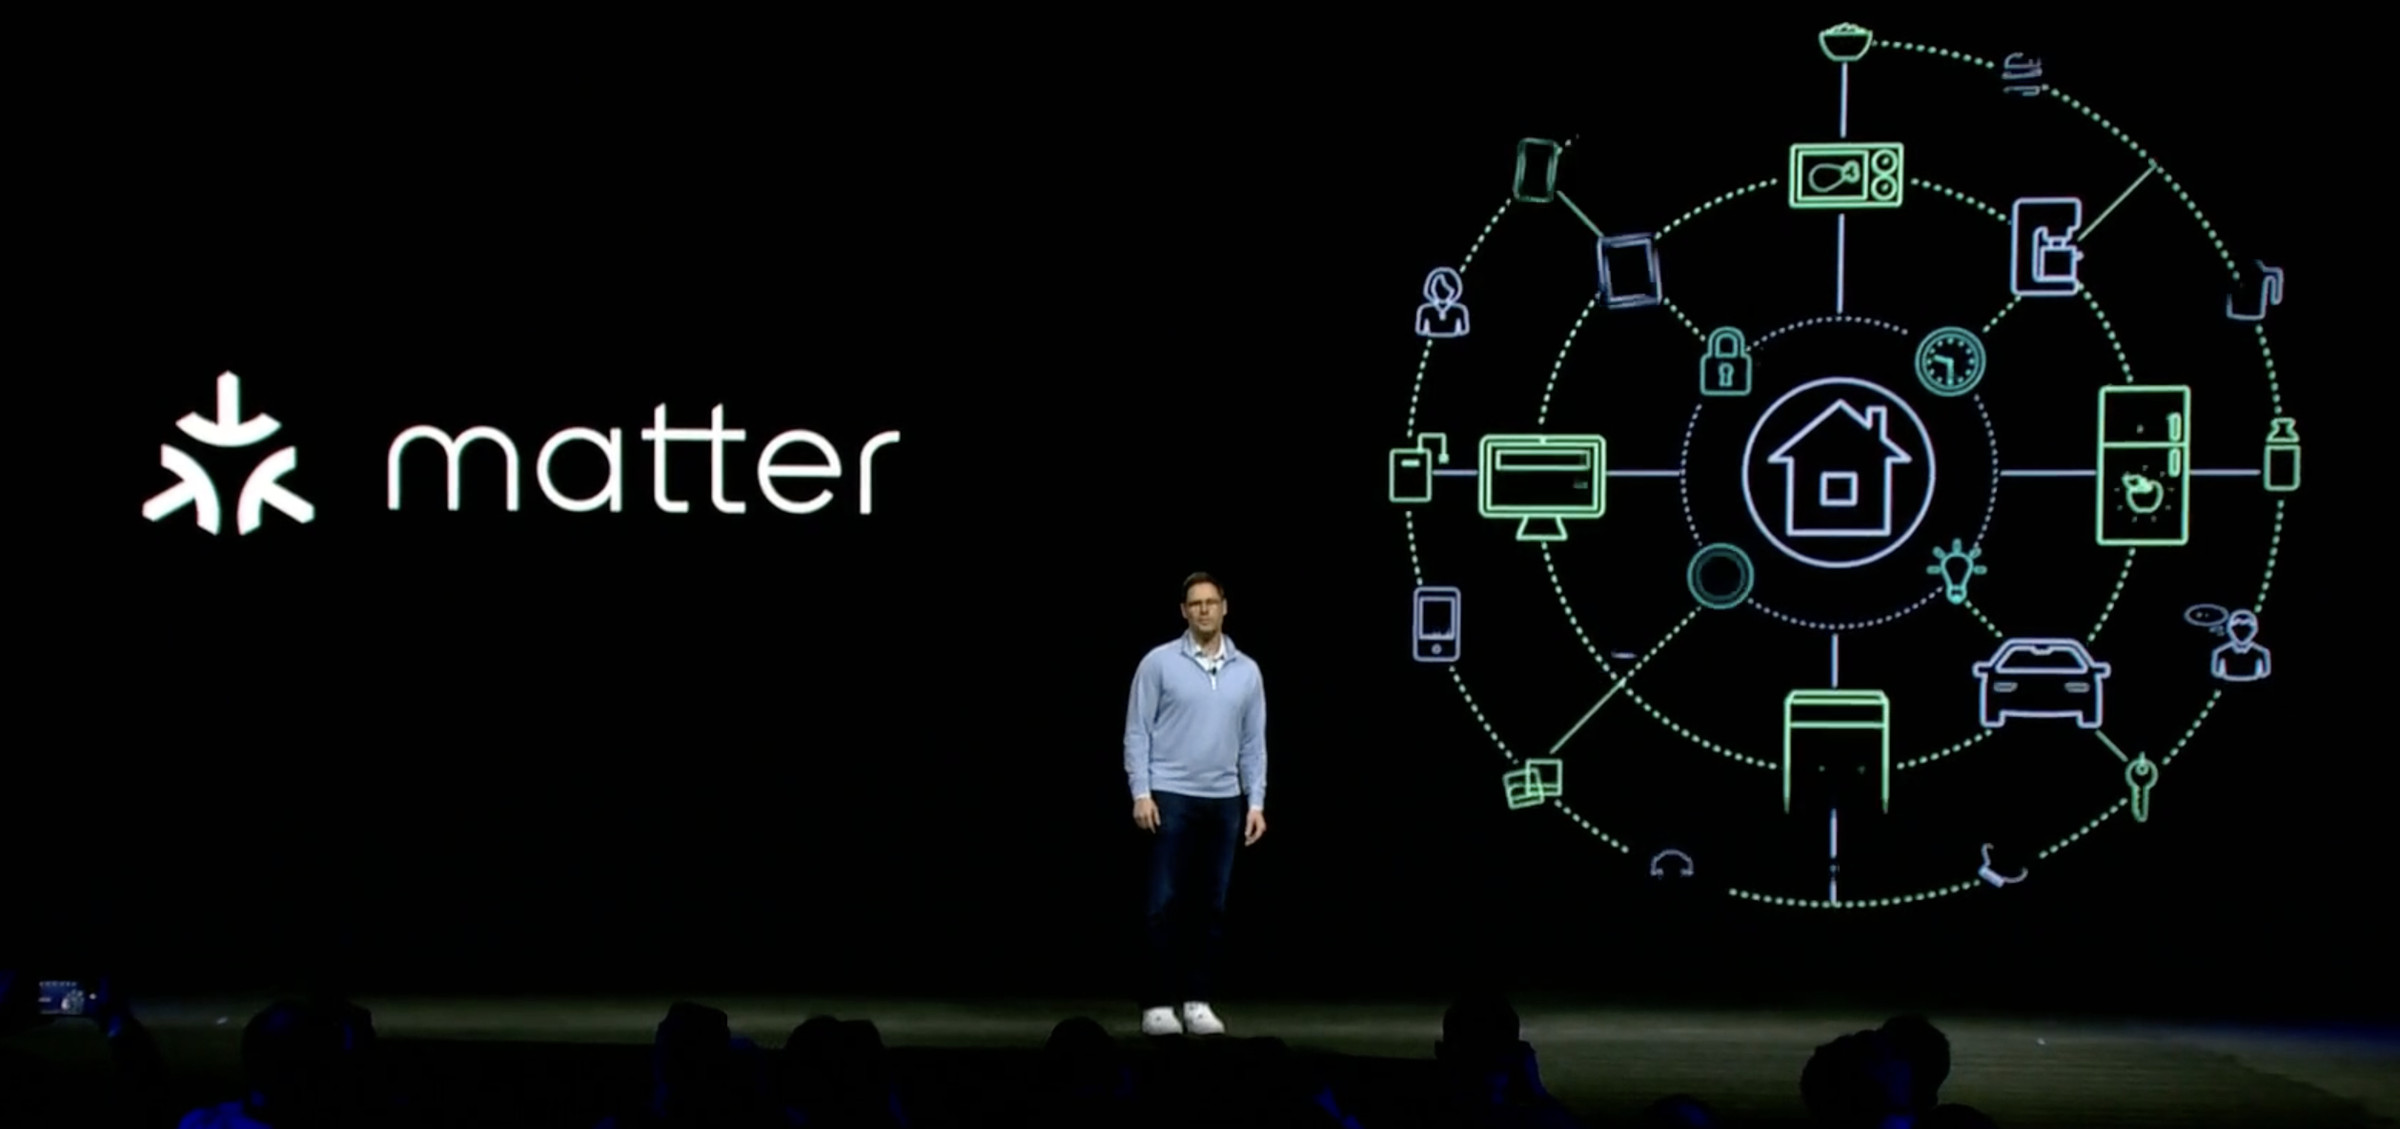 Mark Benson, the new head of Samsung SmartThings US, on stage at CES 2022 discussing plans for the adoption of Matter.